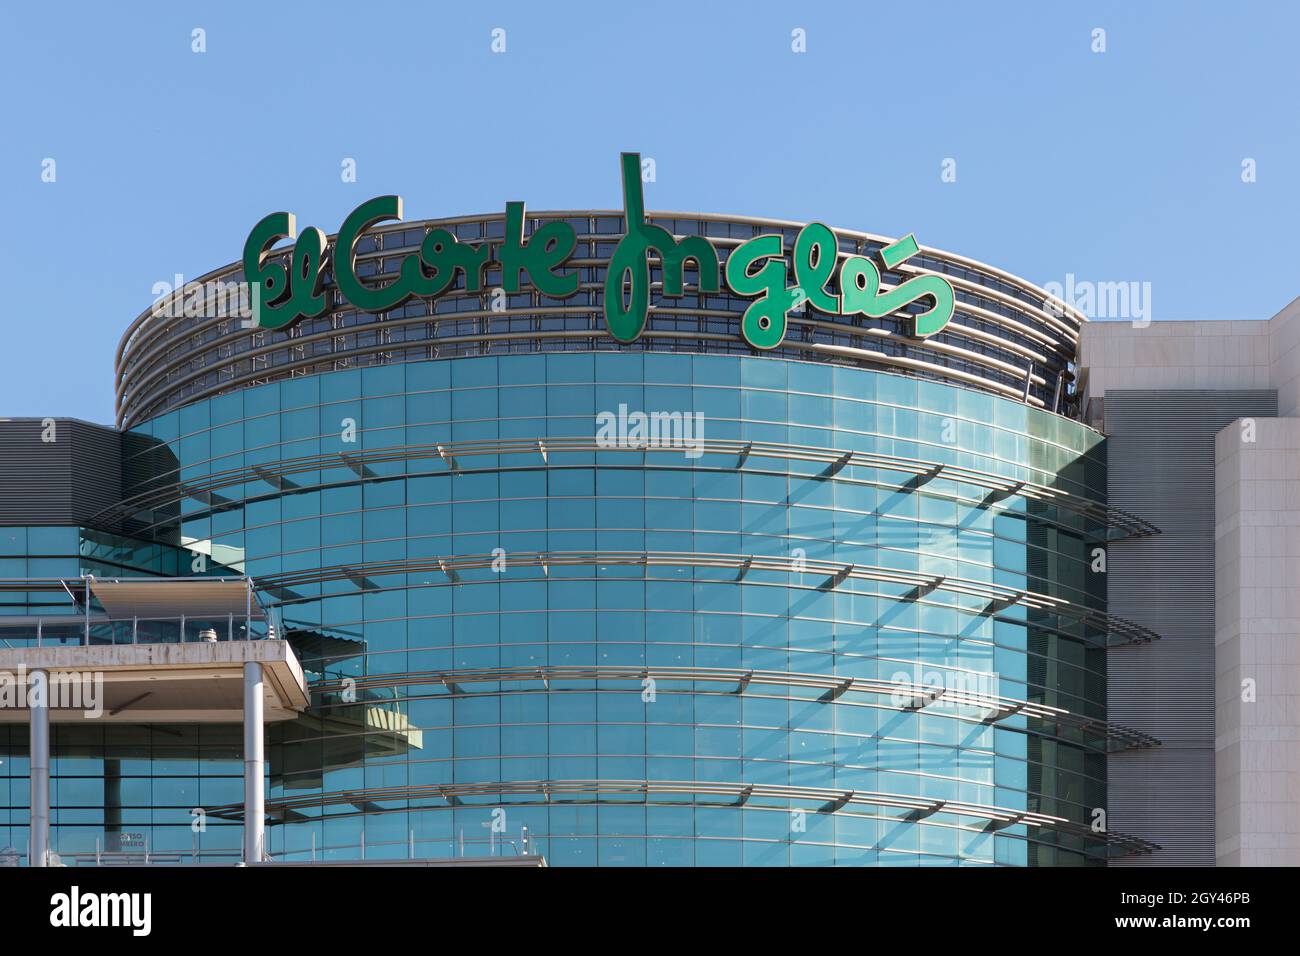 VALENCIA, SPAIN - OCTOBER 05, 2021: El Corte Ingles is a Spanish department  store chain. It is one of the biggest department store groups in Europe  Stock Photo - Alamy